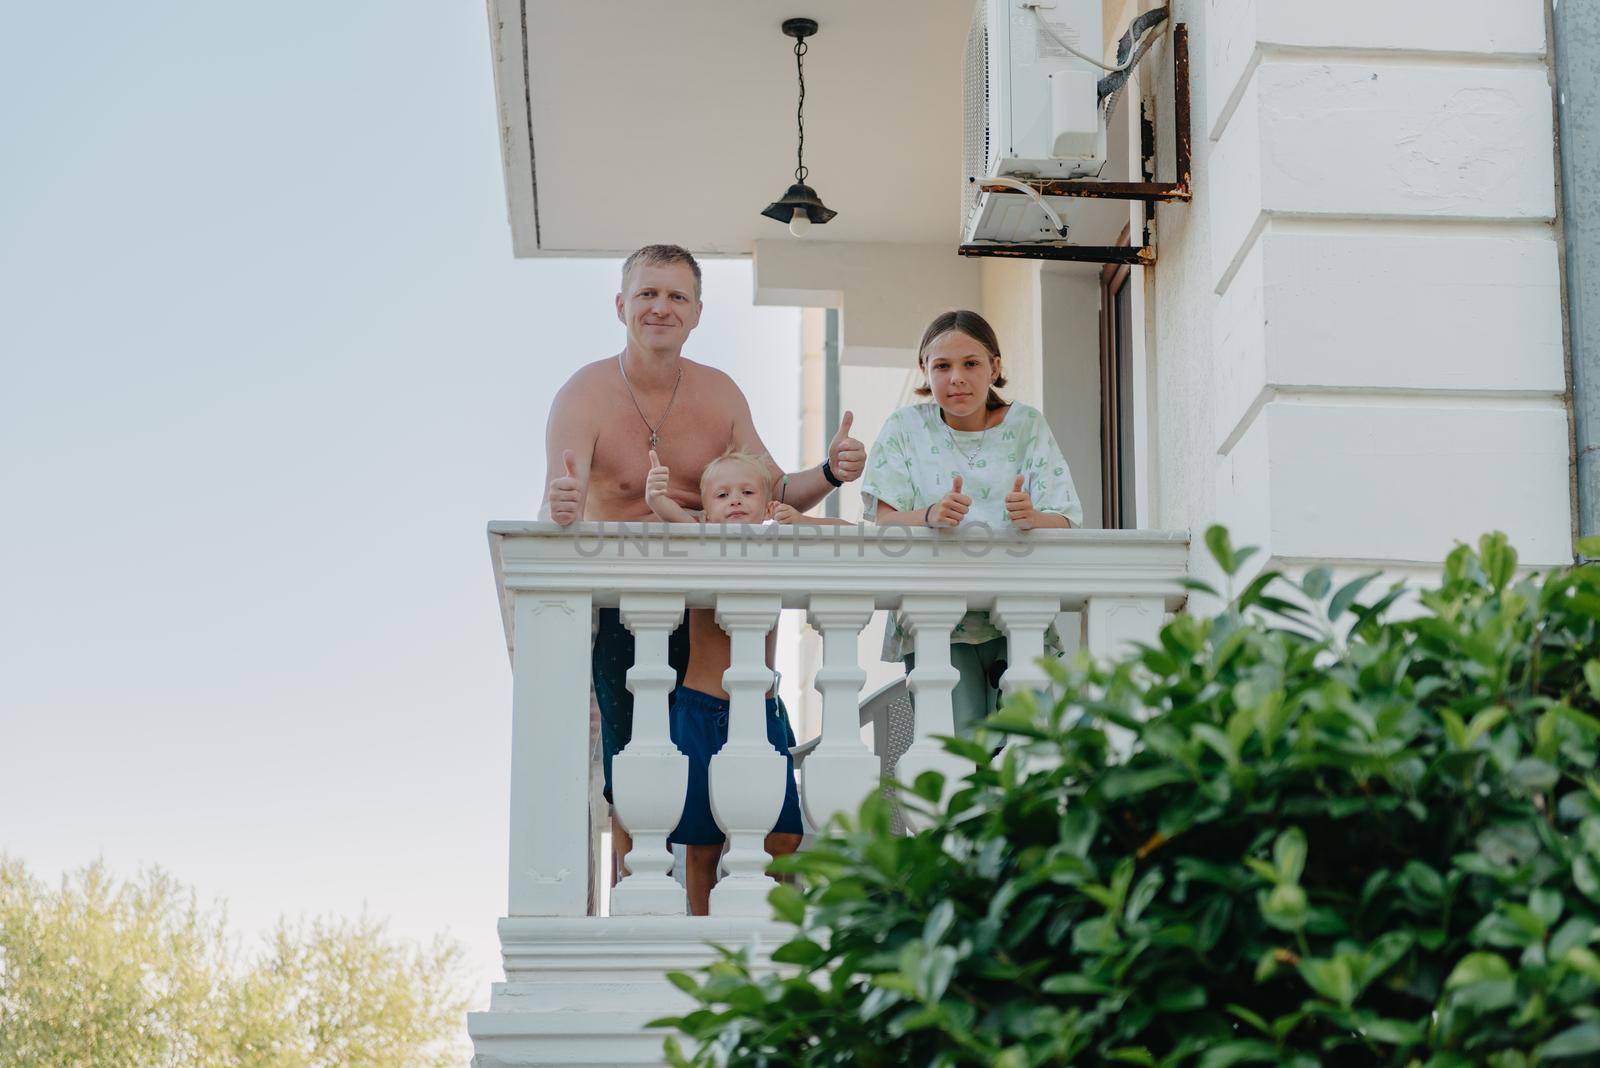 Family of three people on hotel balcony in summer enjoying their vacation.